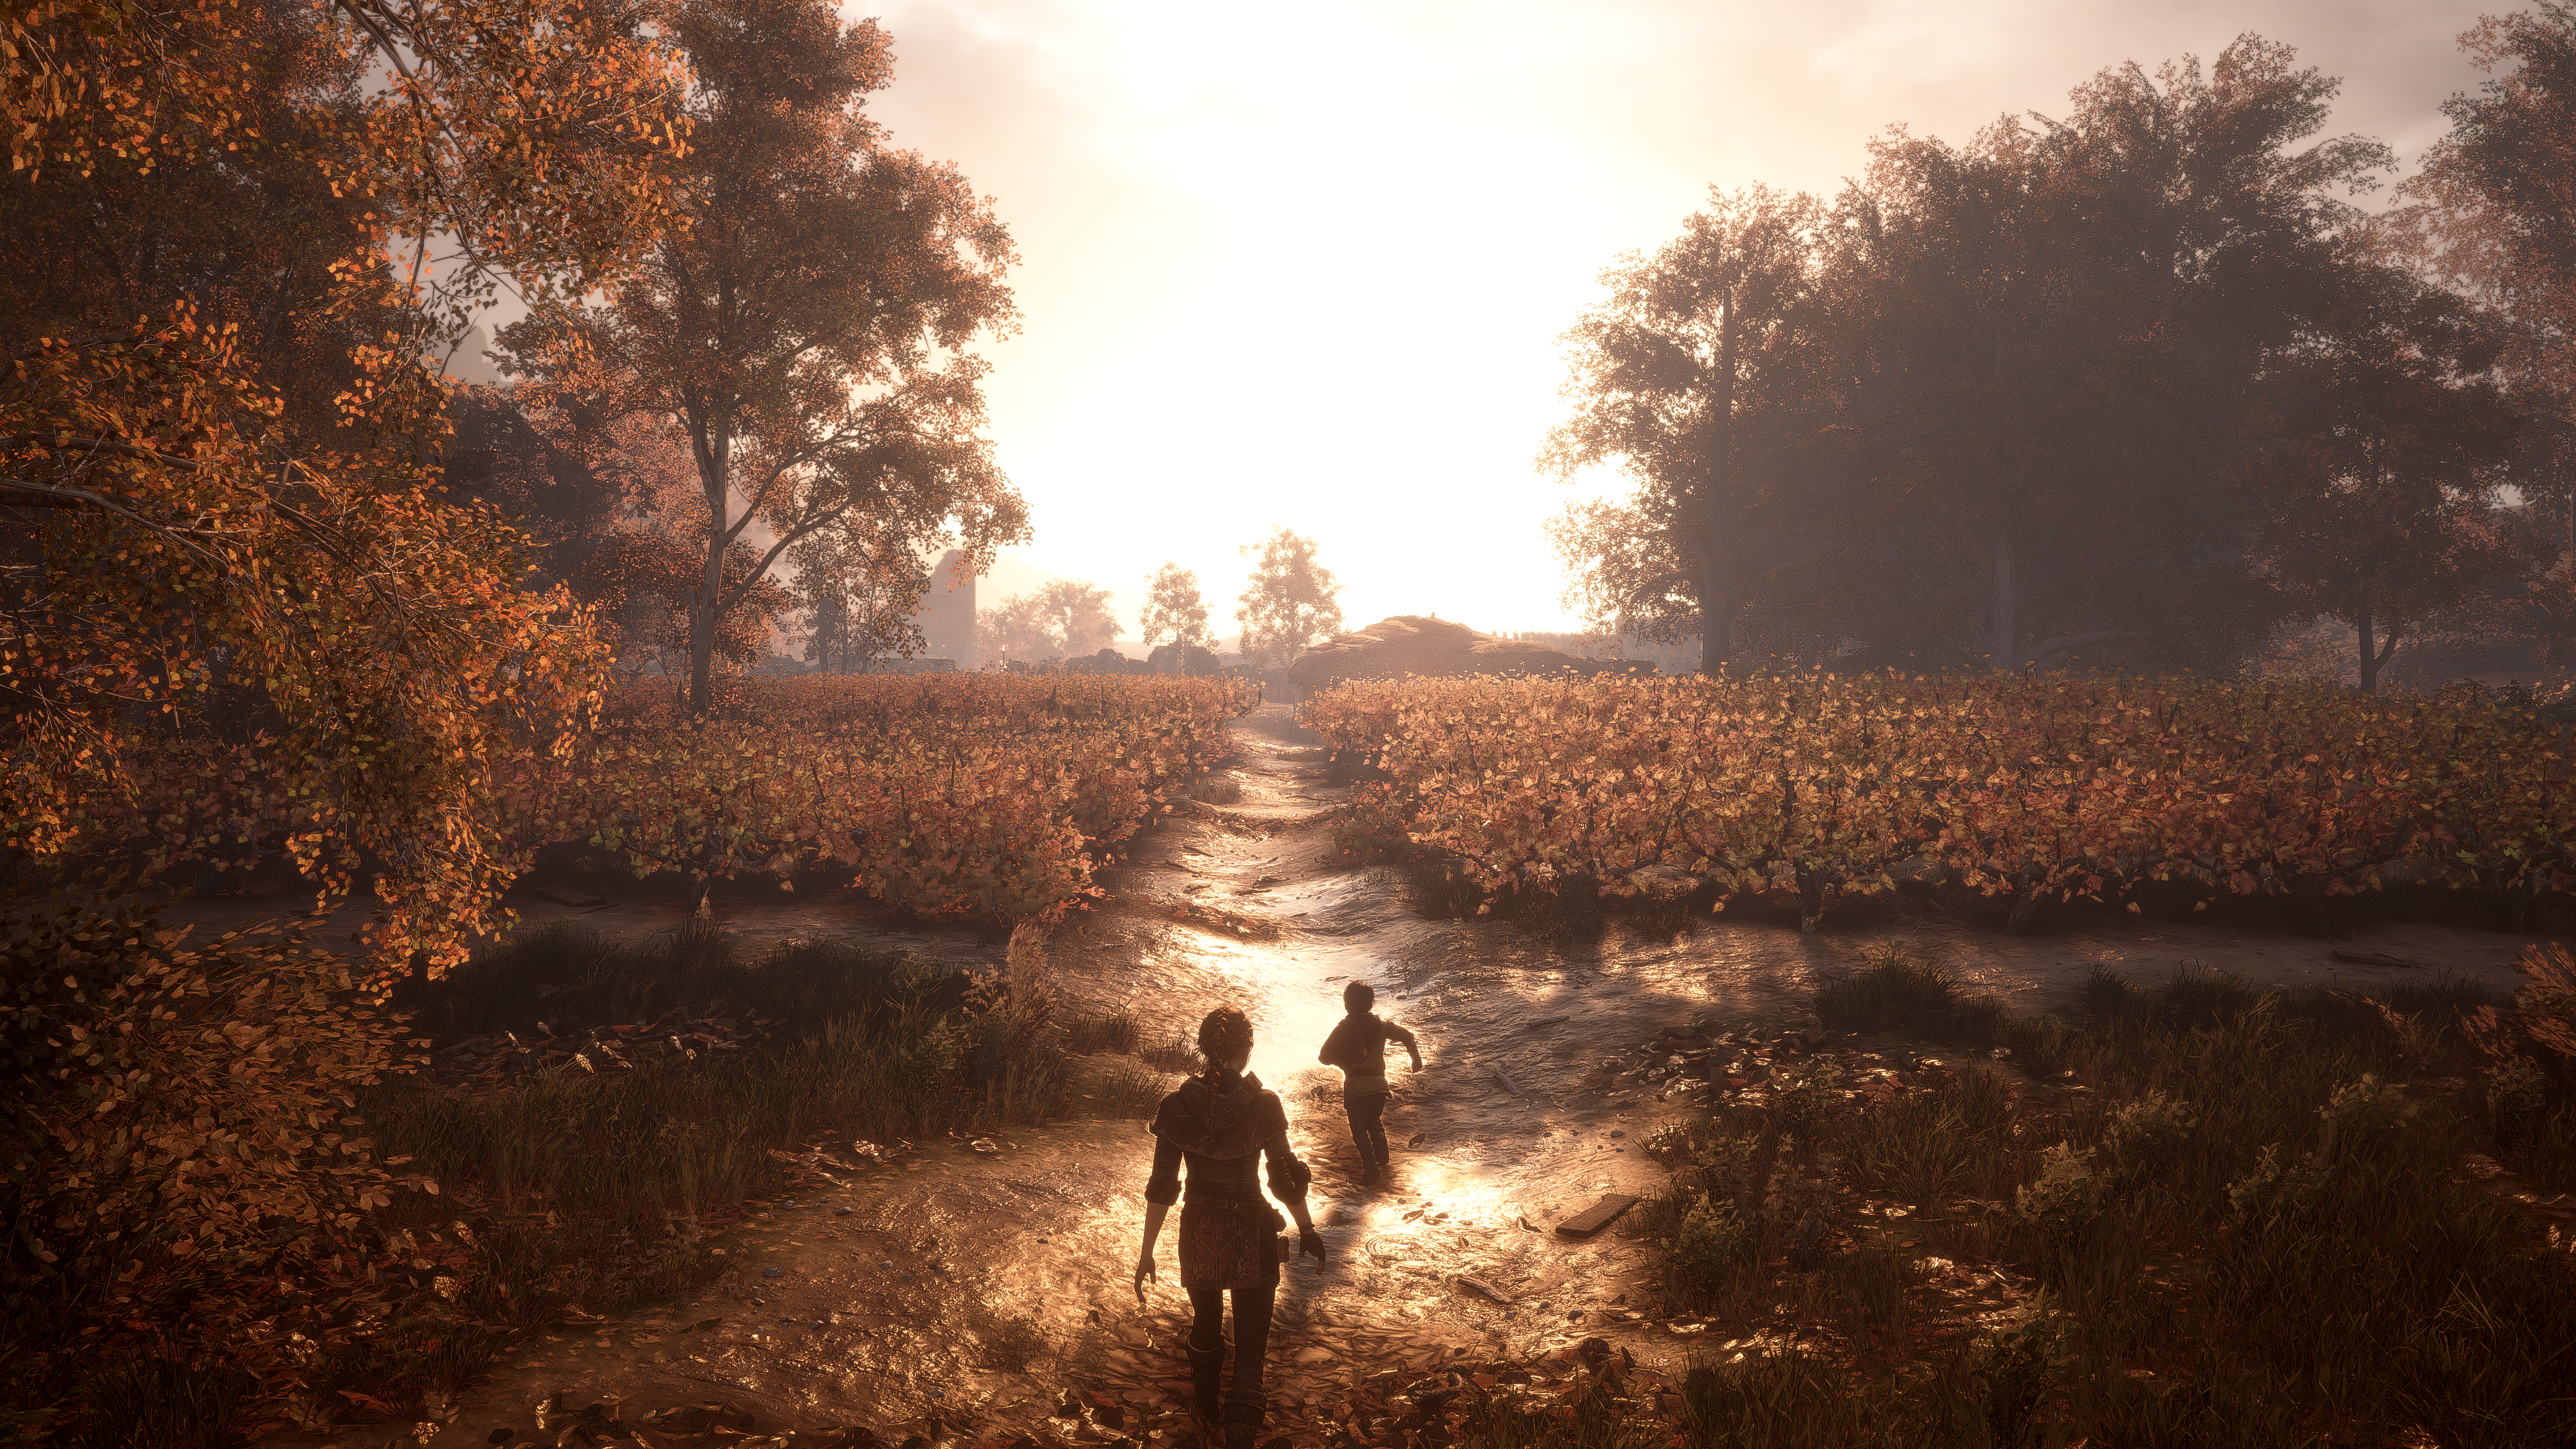 General 3840x2160 A Plague Tale Innocence CGI video games Hugo (A Plague Tale Innocence) field trees running women children Amicia video game art video game characters sunlight